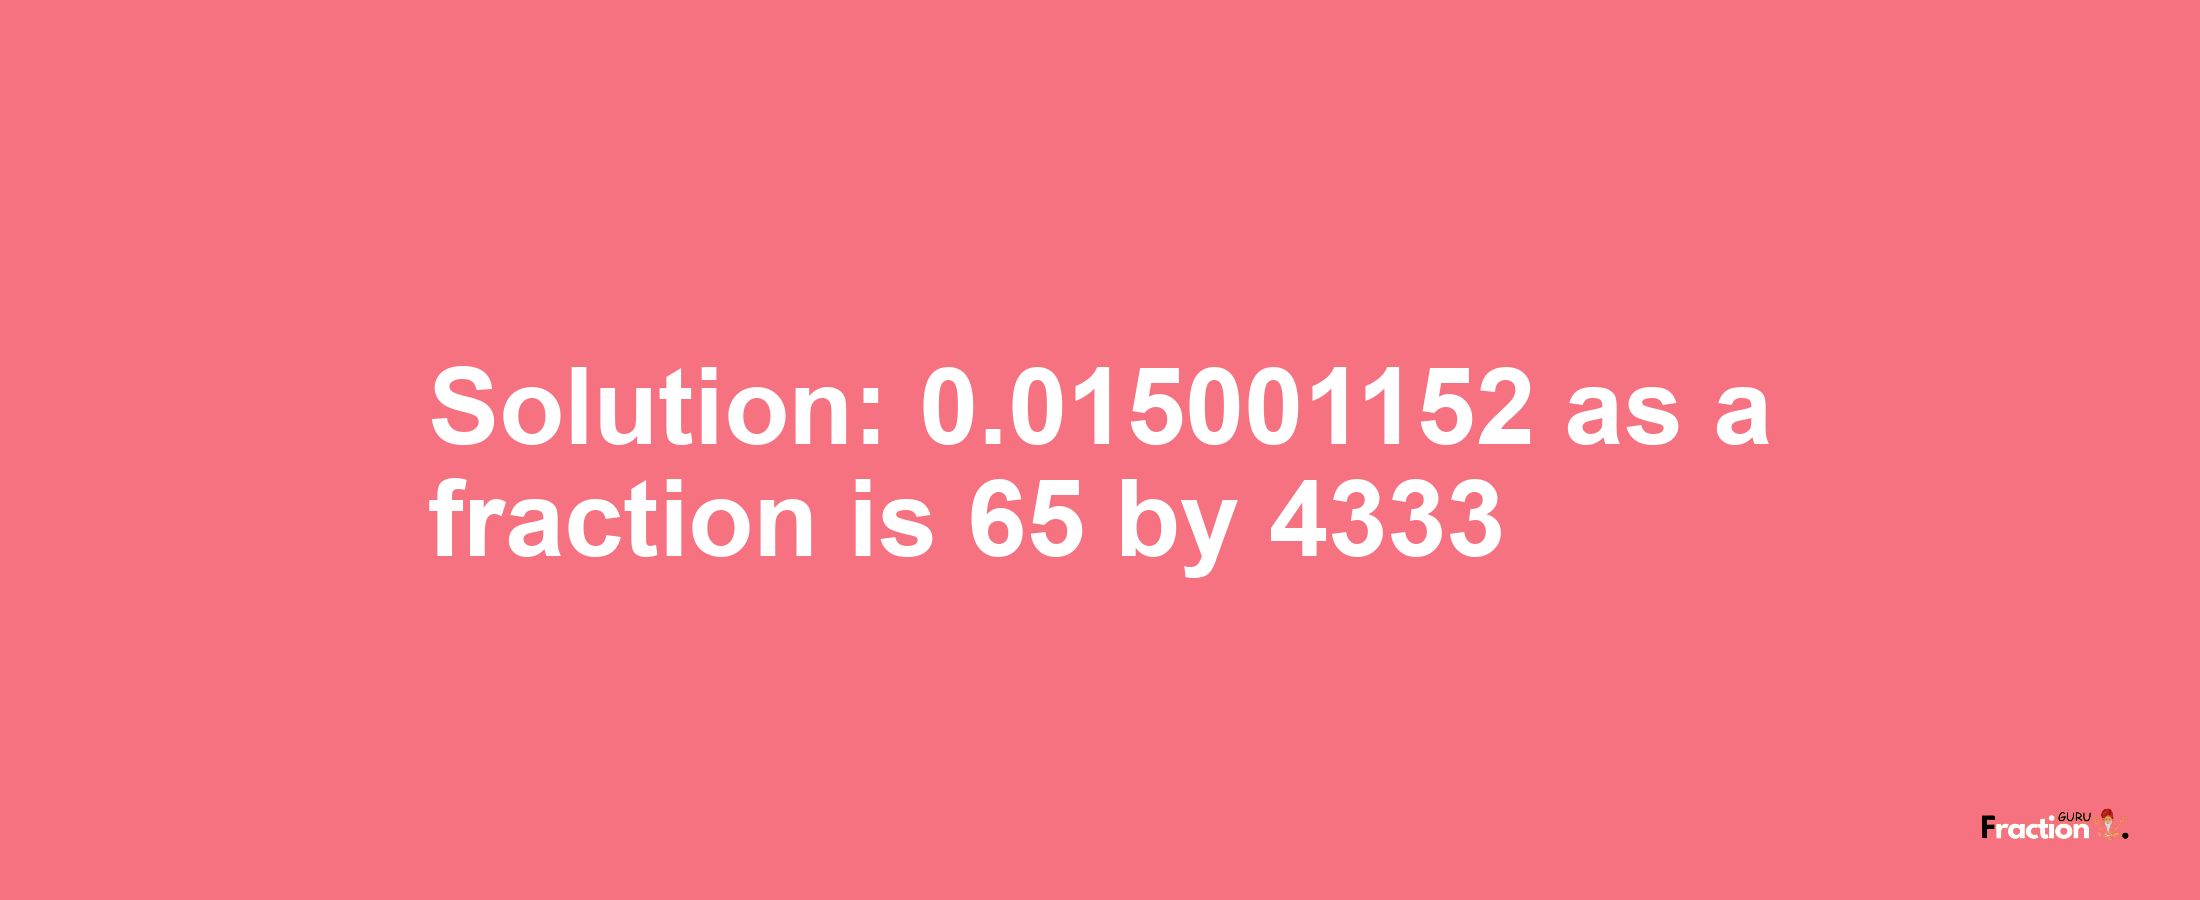 Solution:0.015001152 as a fraction is 65/4333